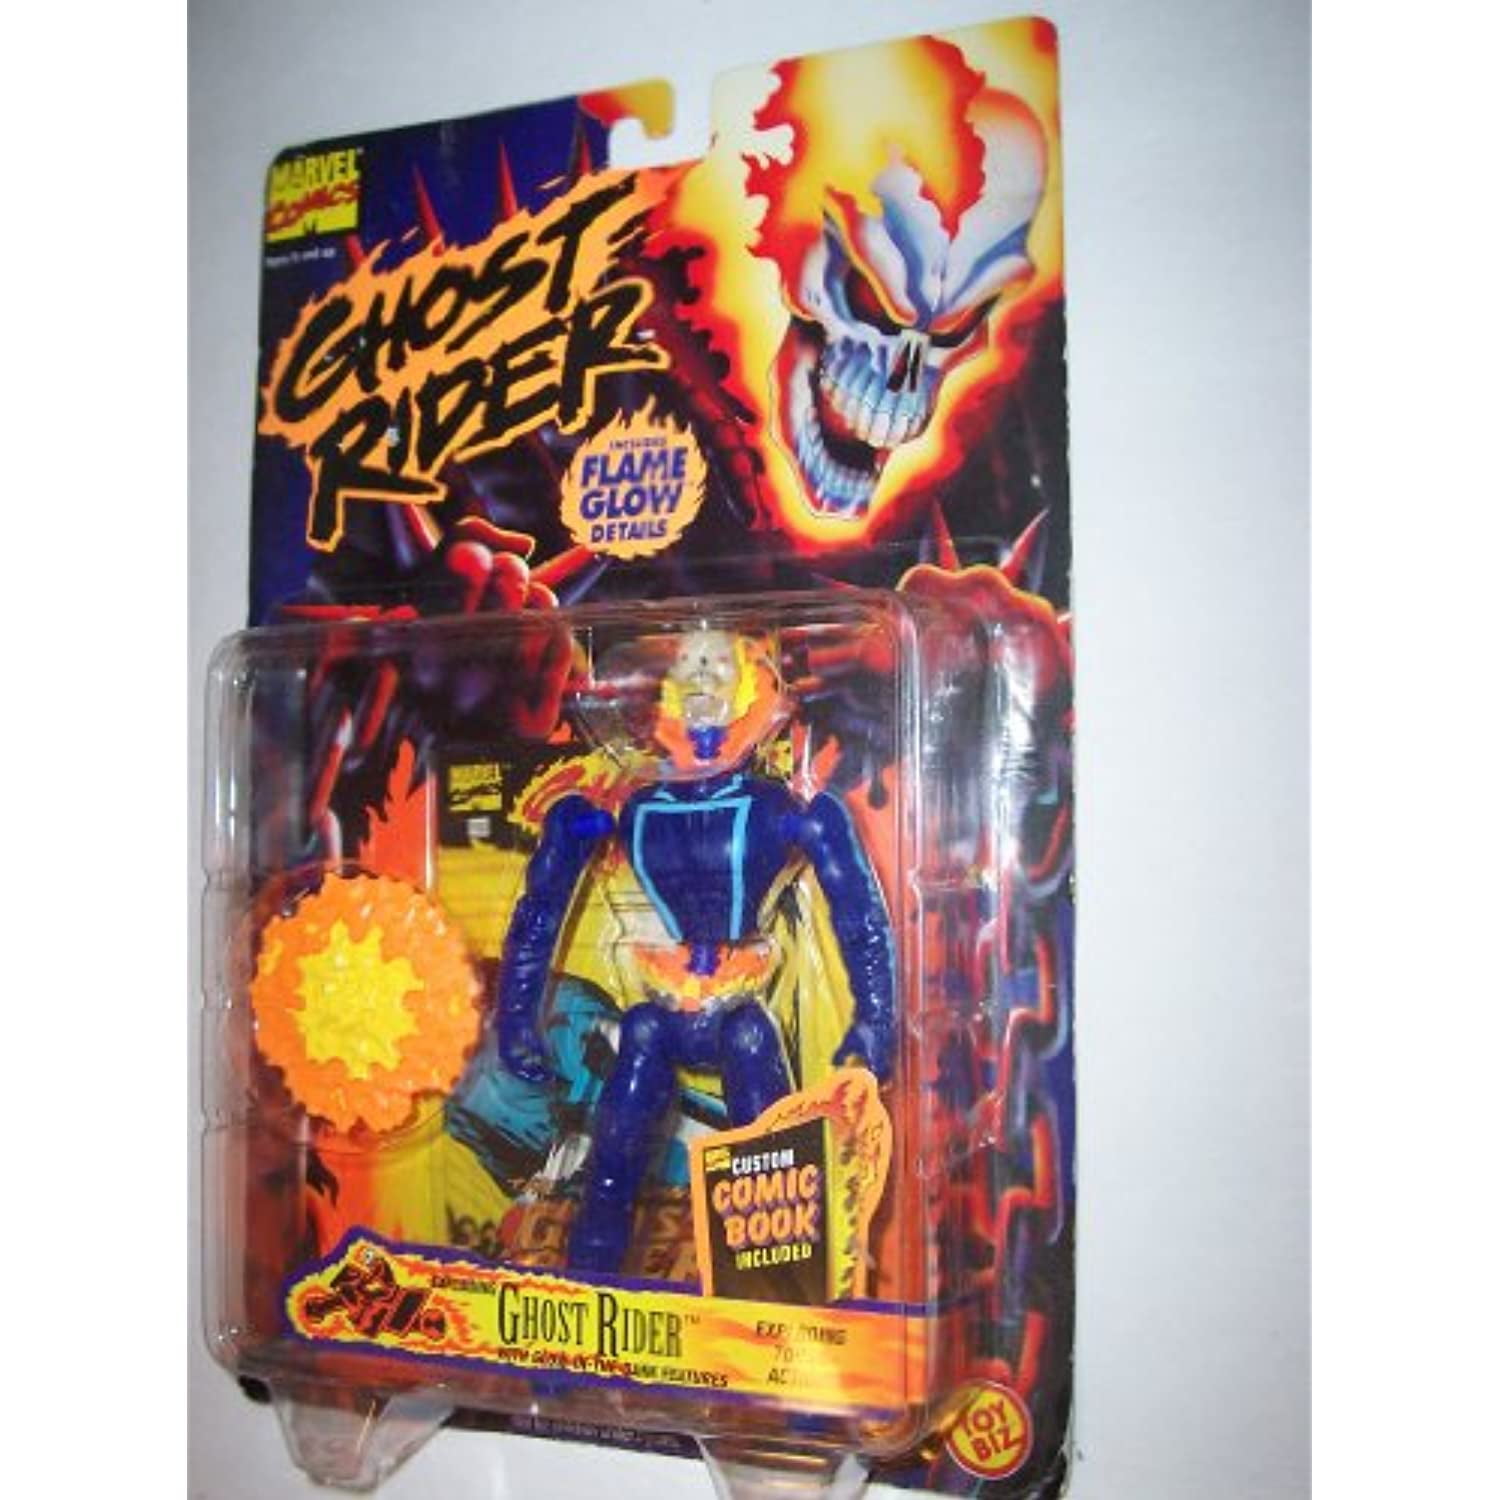 Ghost Rider with motorcycle minifigure  Marvel movie Comic version toy figure! 